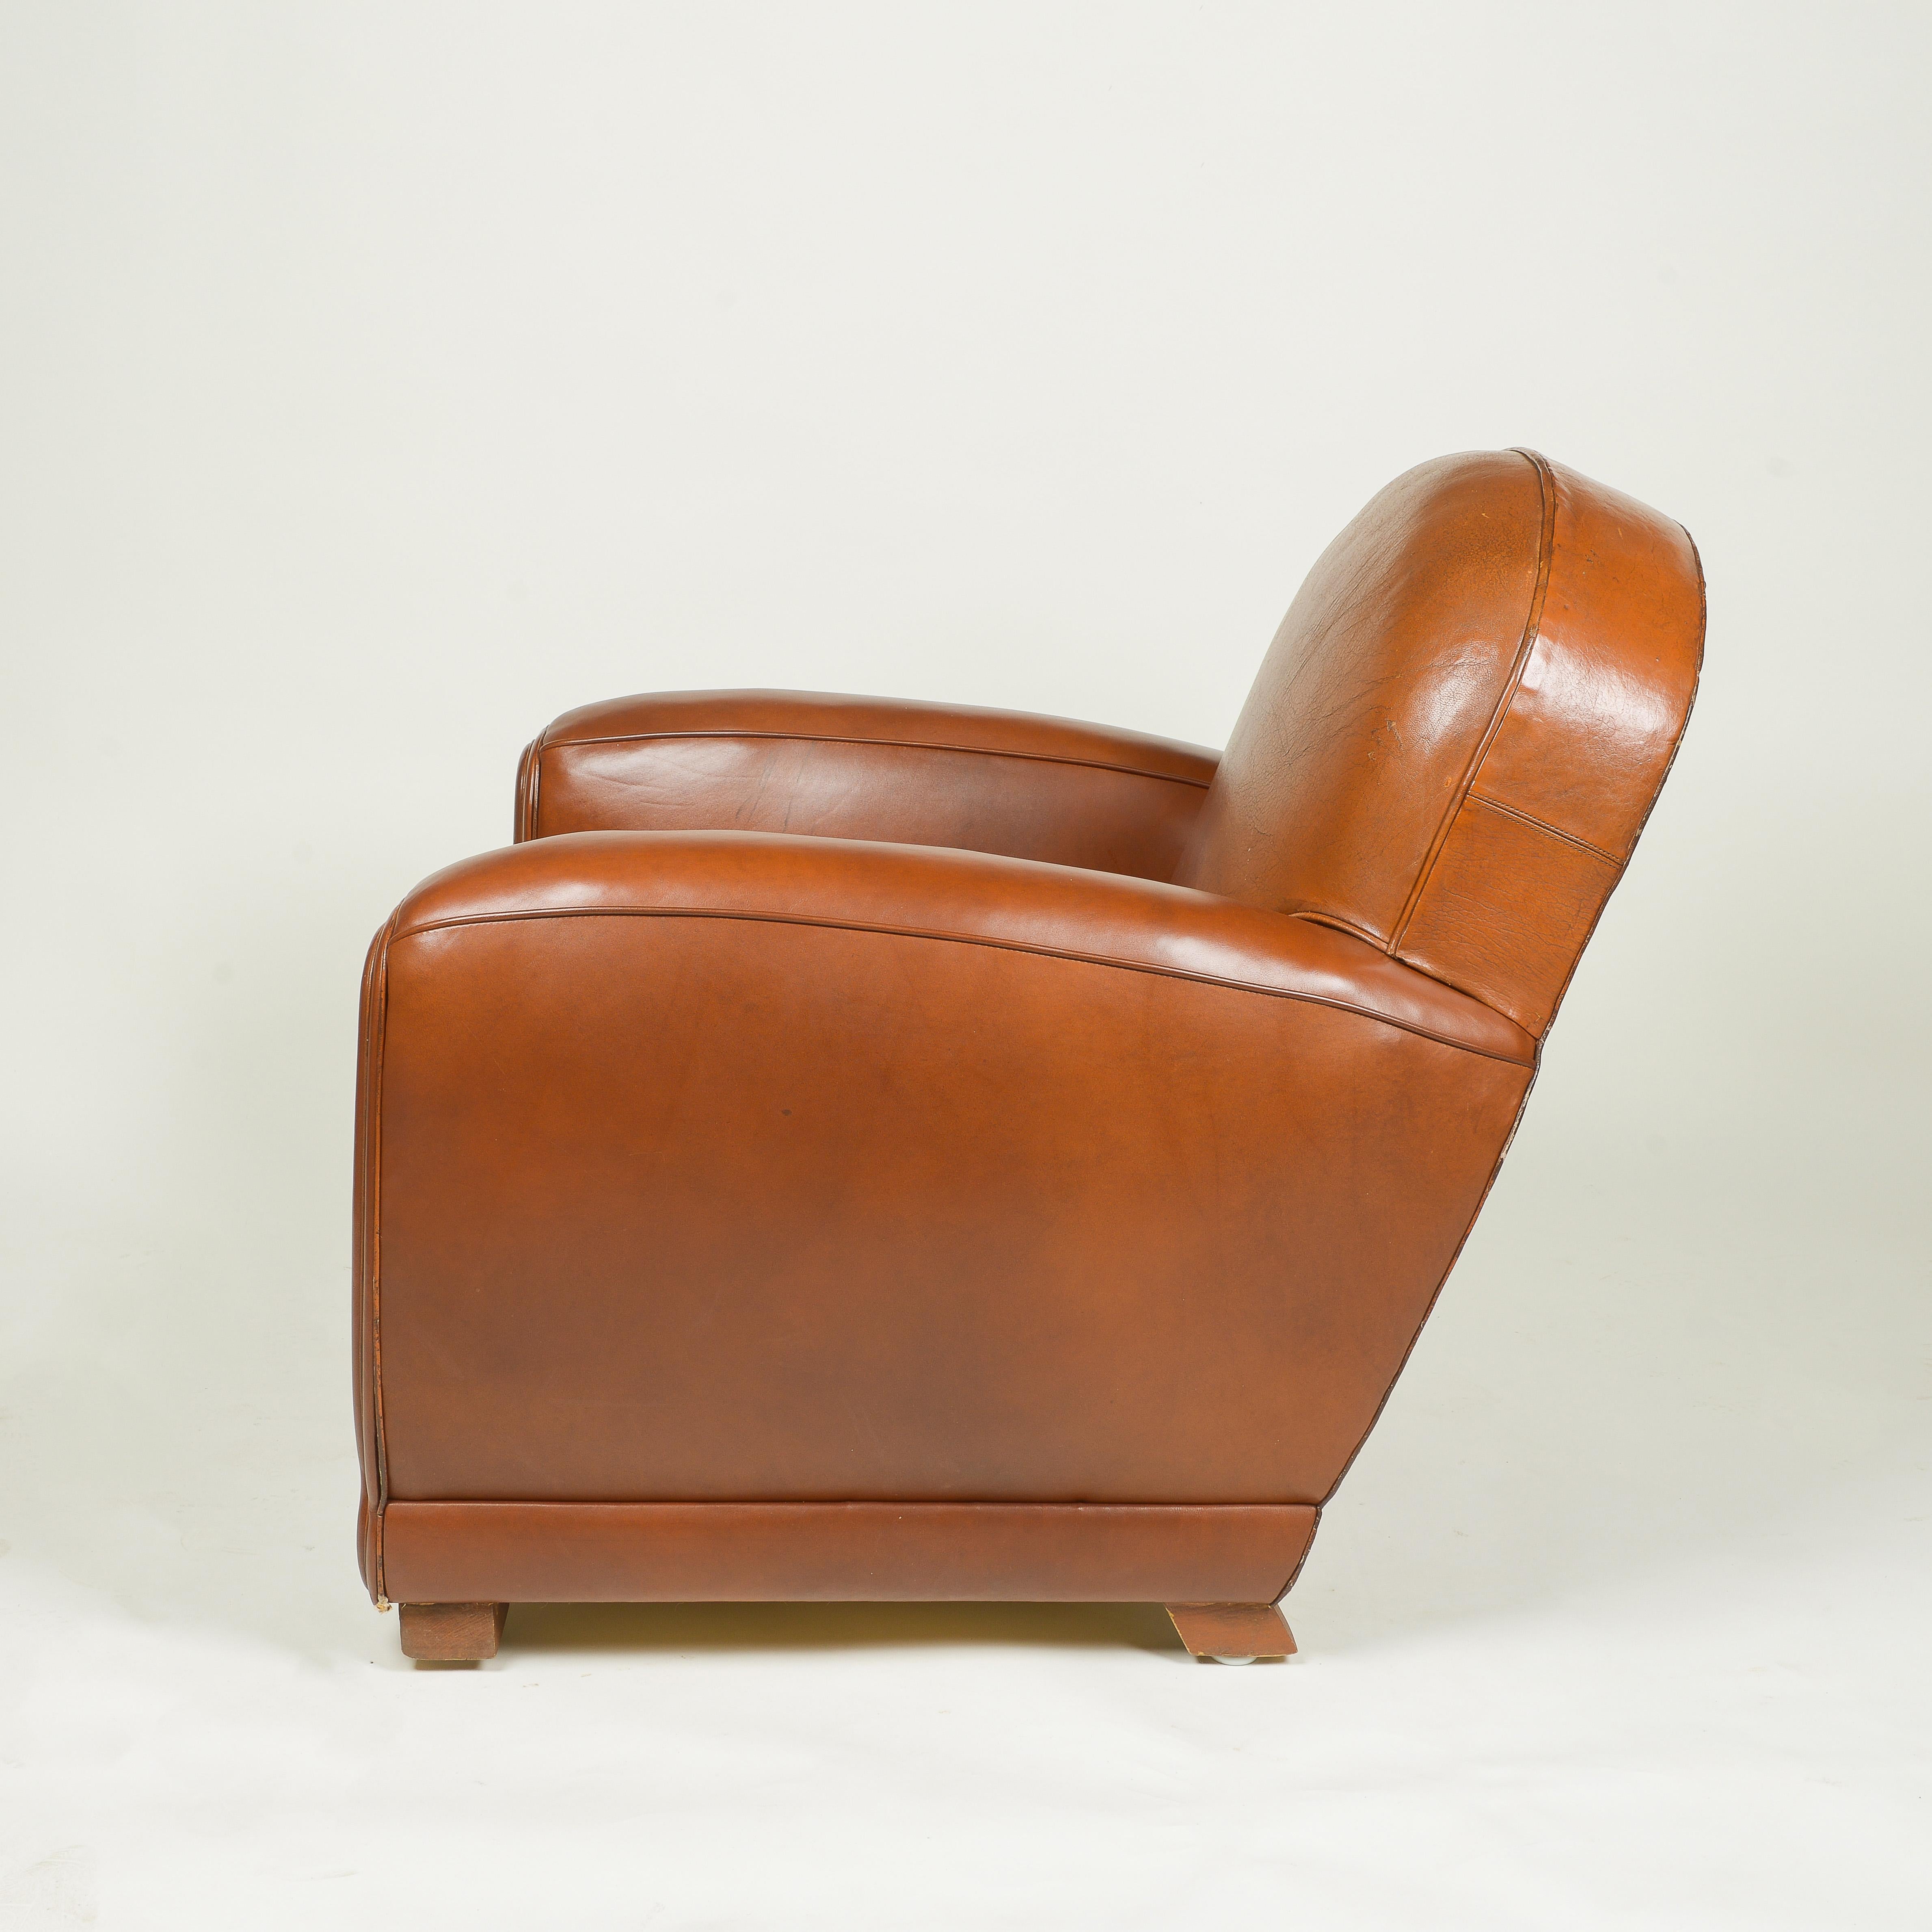 Pair of French Art Deco Brown Leather Club Chairs In Excellent Condition For Sale In New York, NY